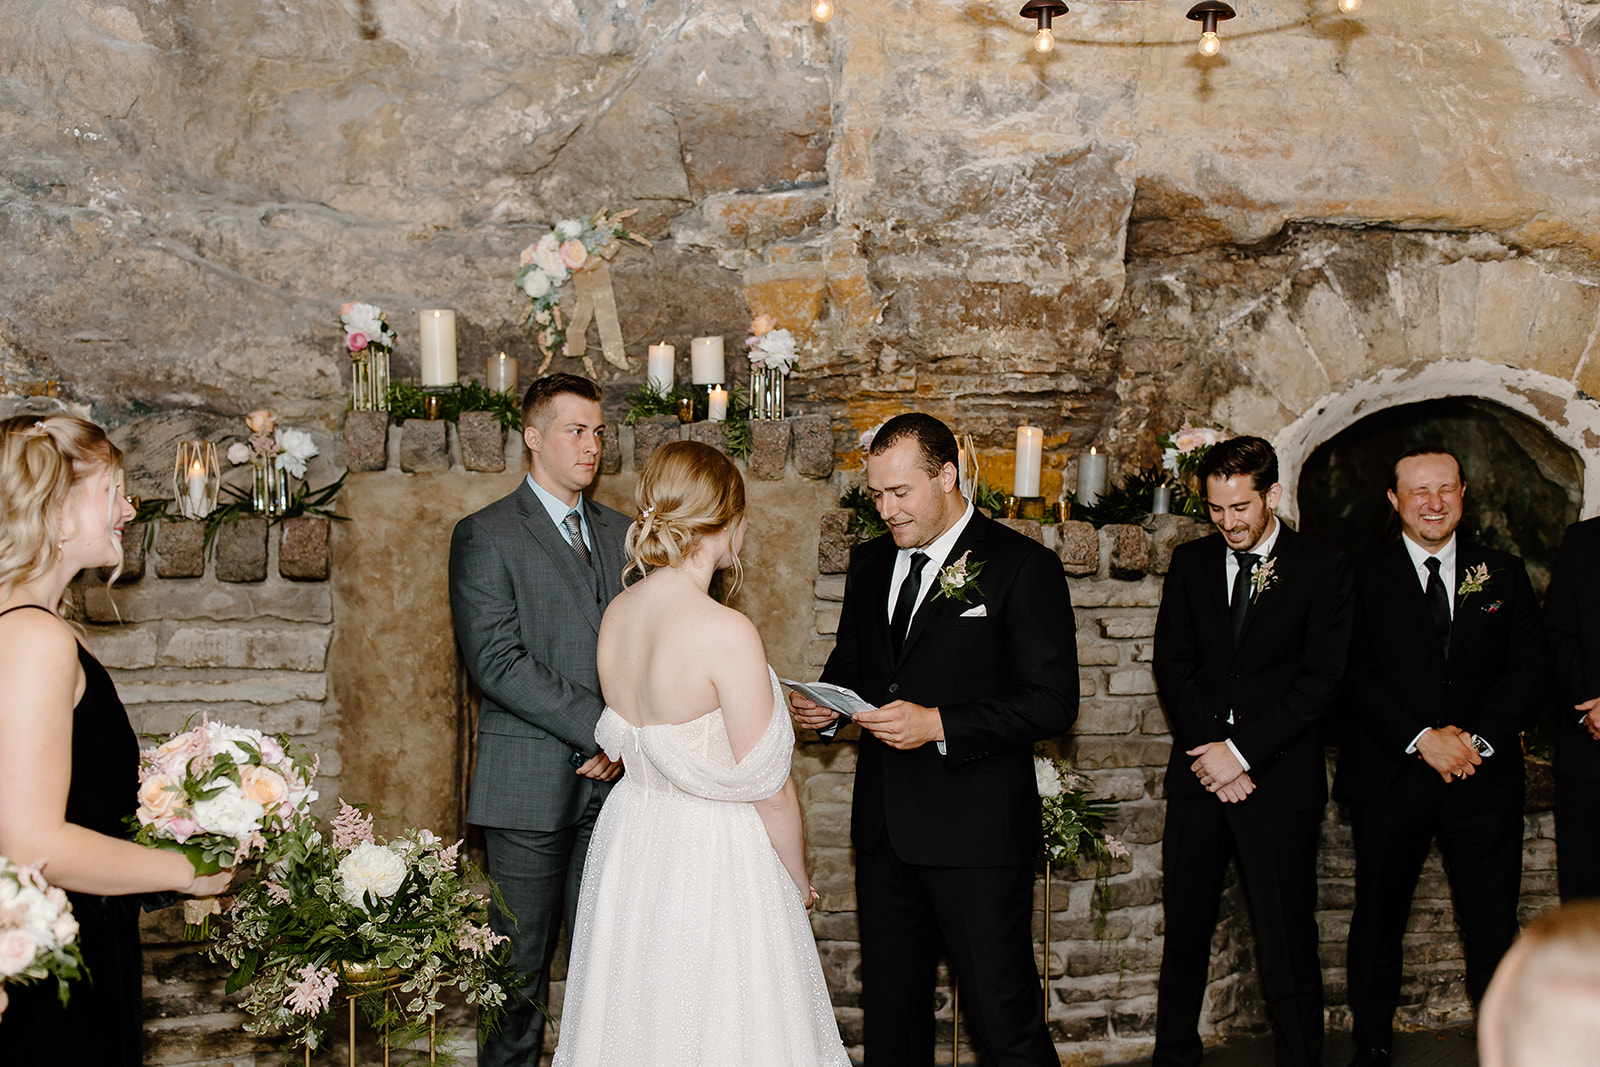 Bride and groom read vows during their ceremony in a cave